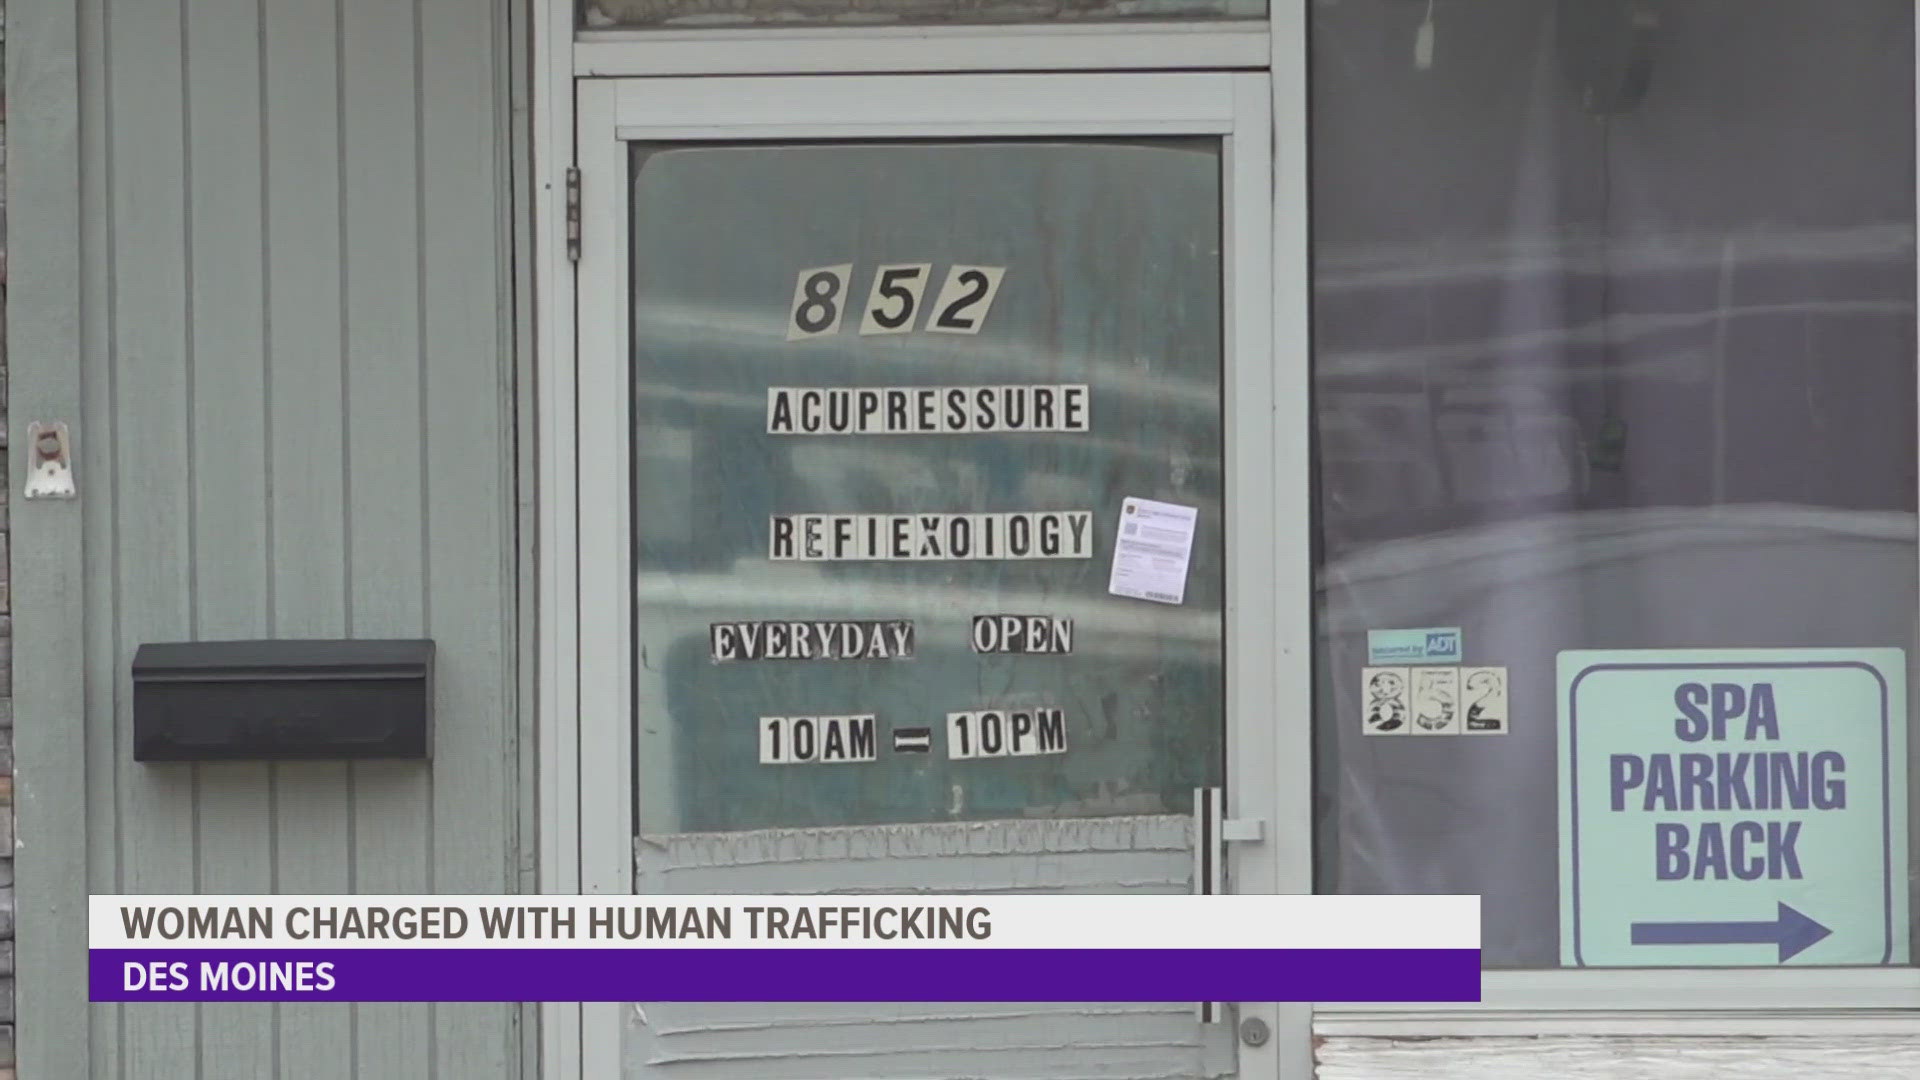 Police executed a search warrant at a local massage parlor on Wednesday, where they located three adult female victims.